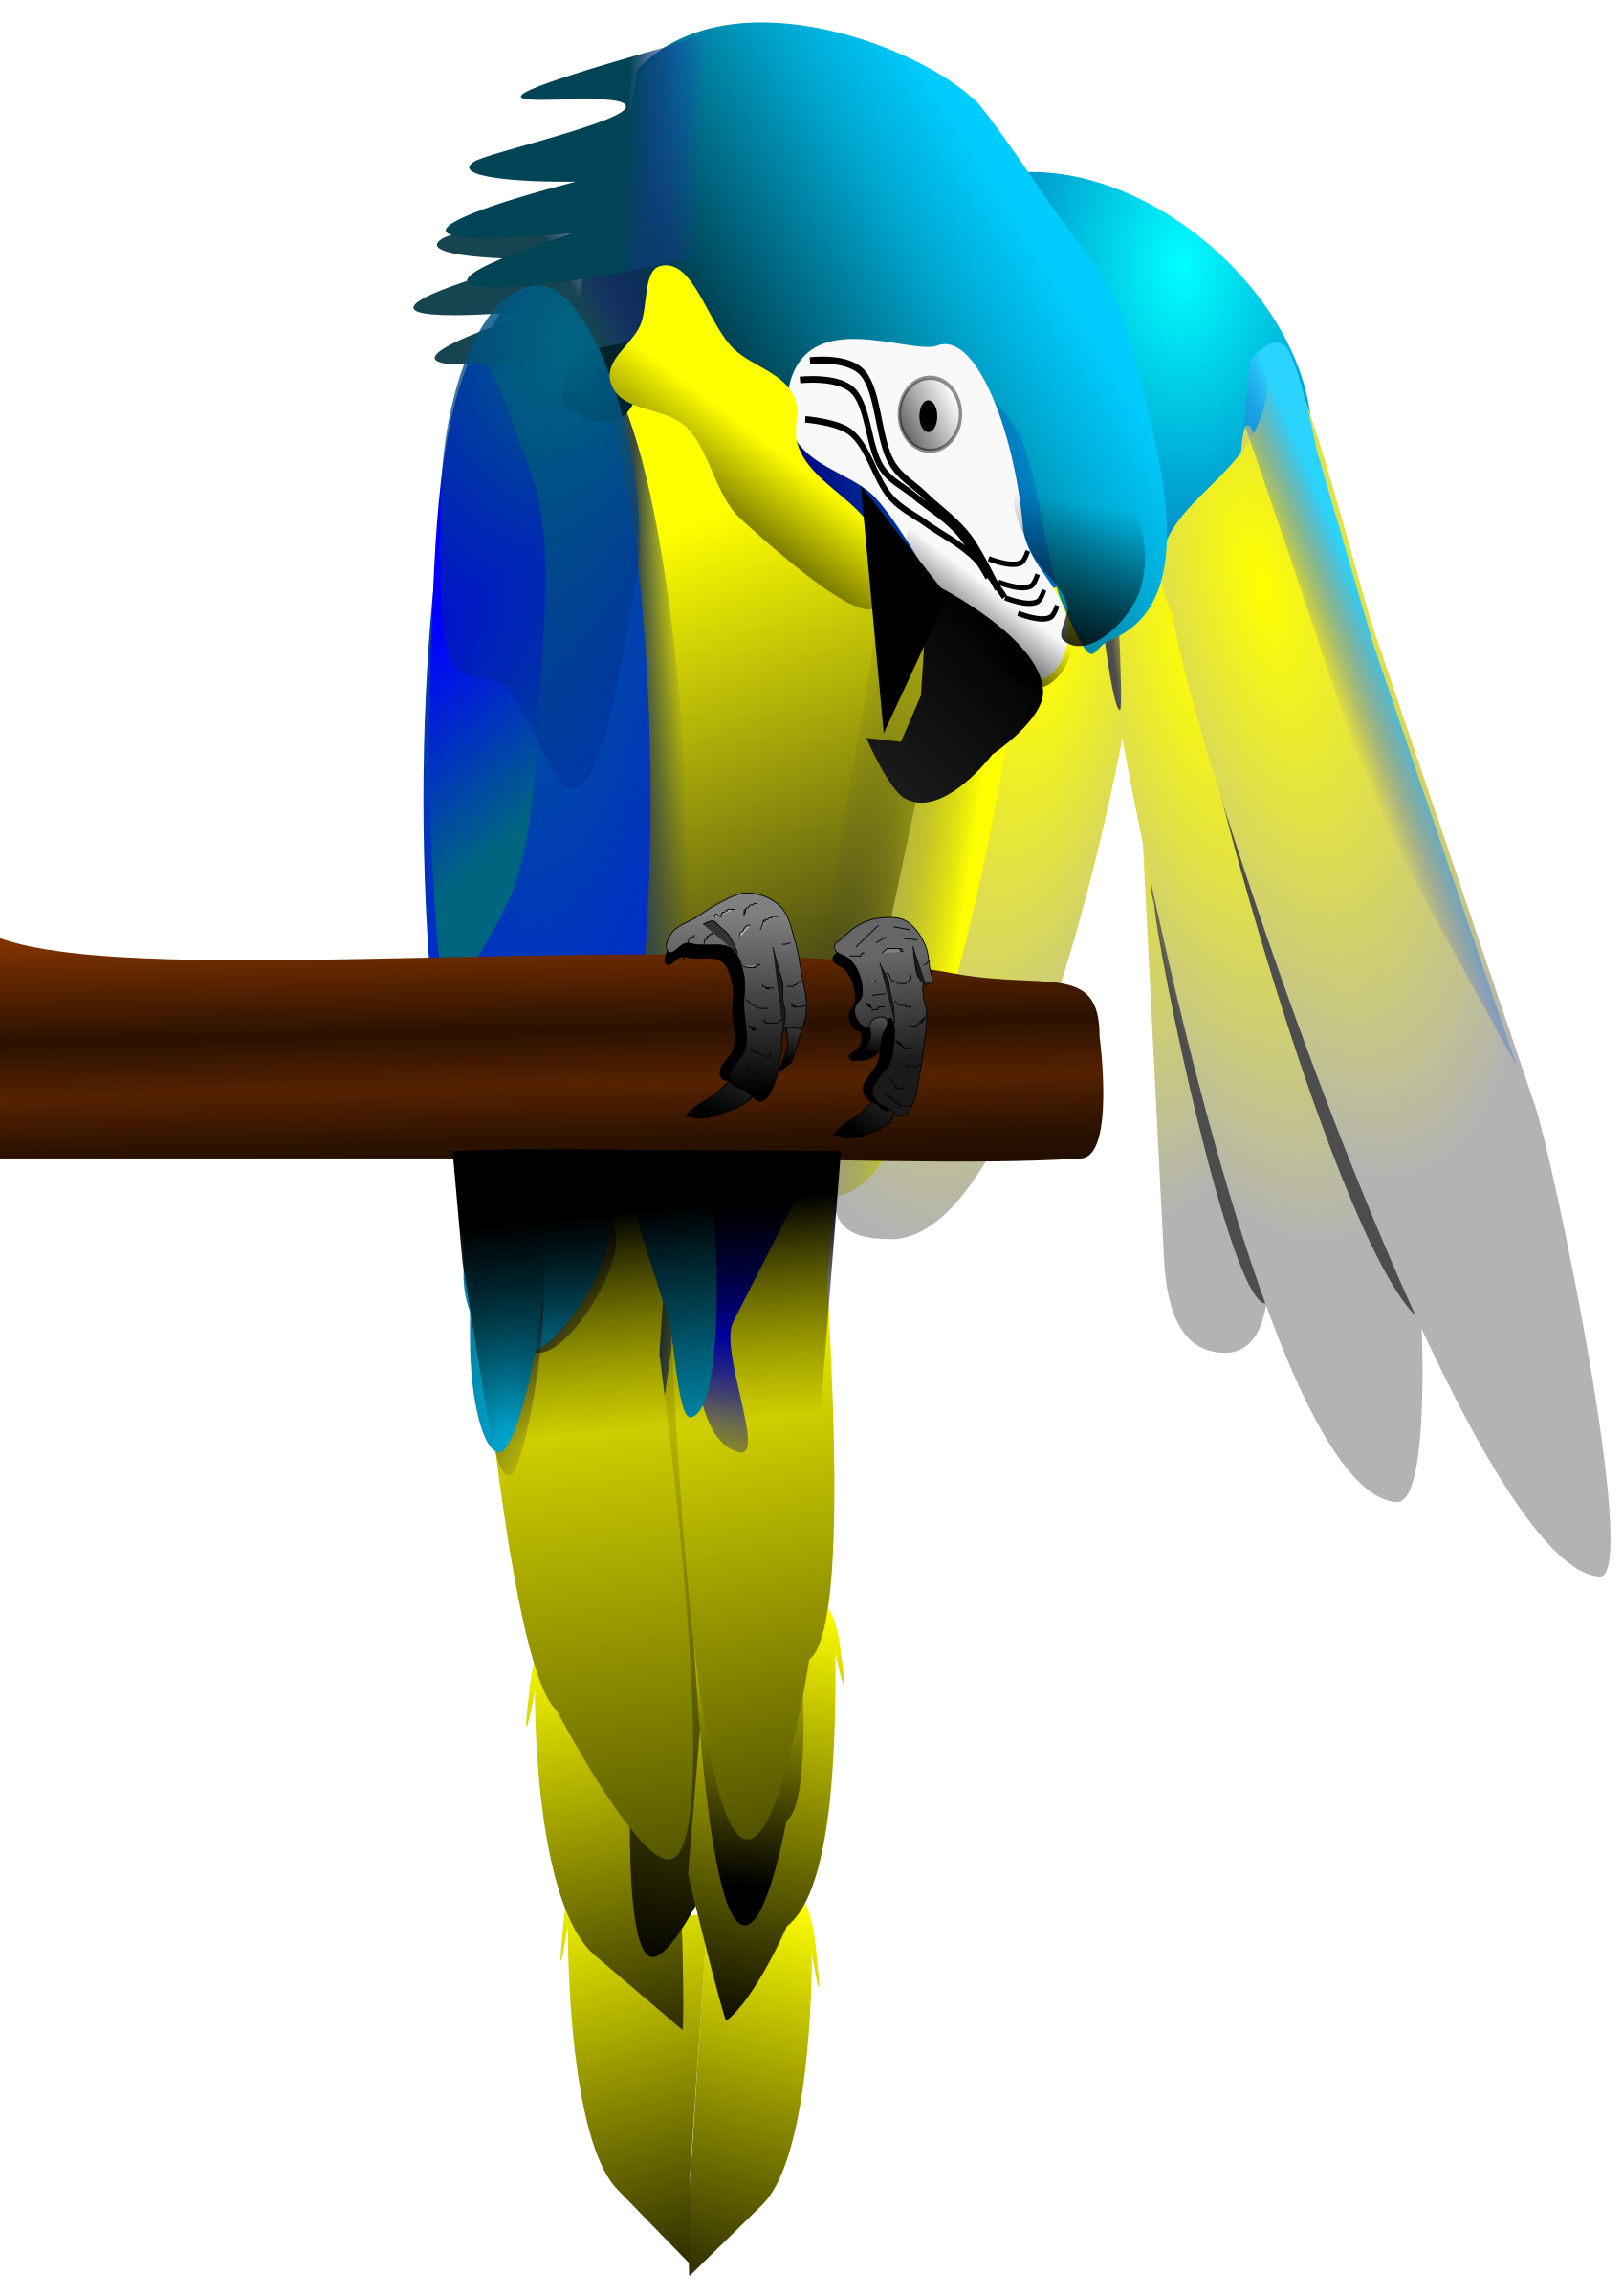 Blue-and-yellow Macaw svg #16, Download drawings